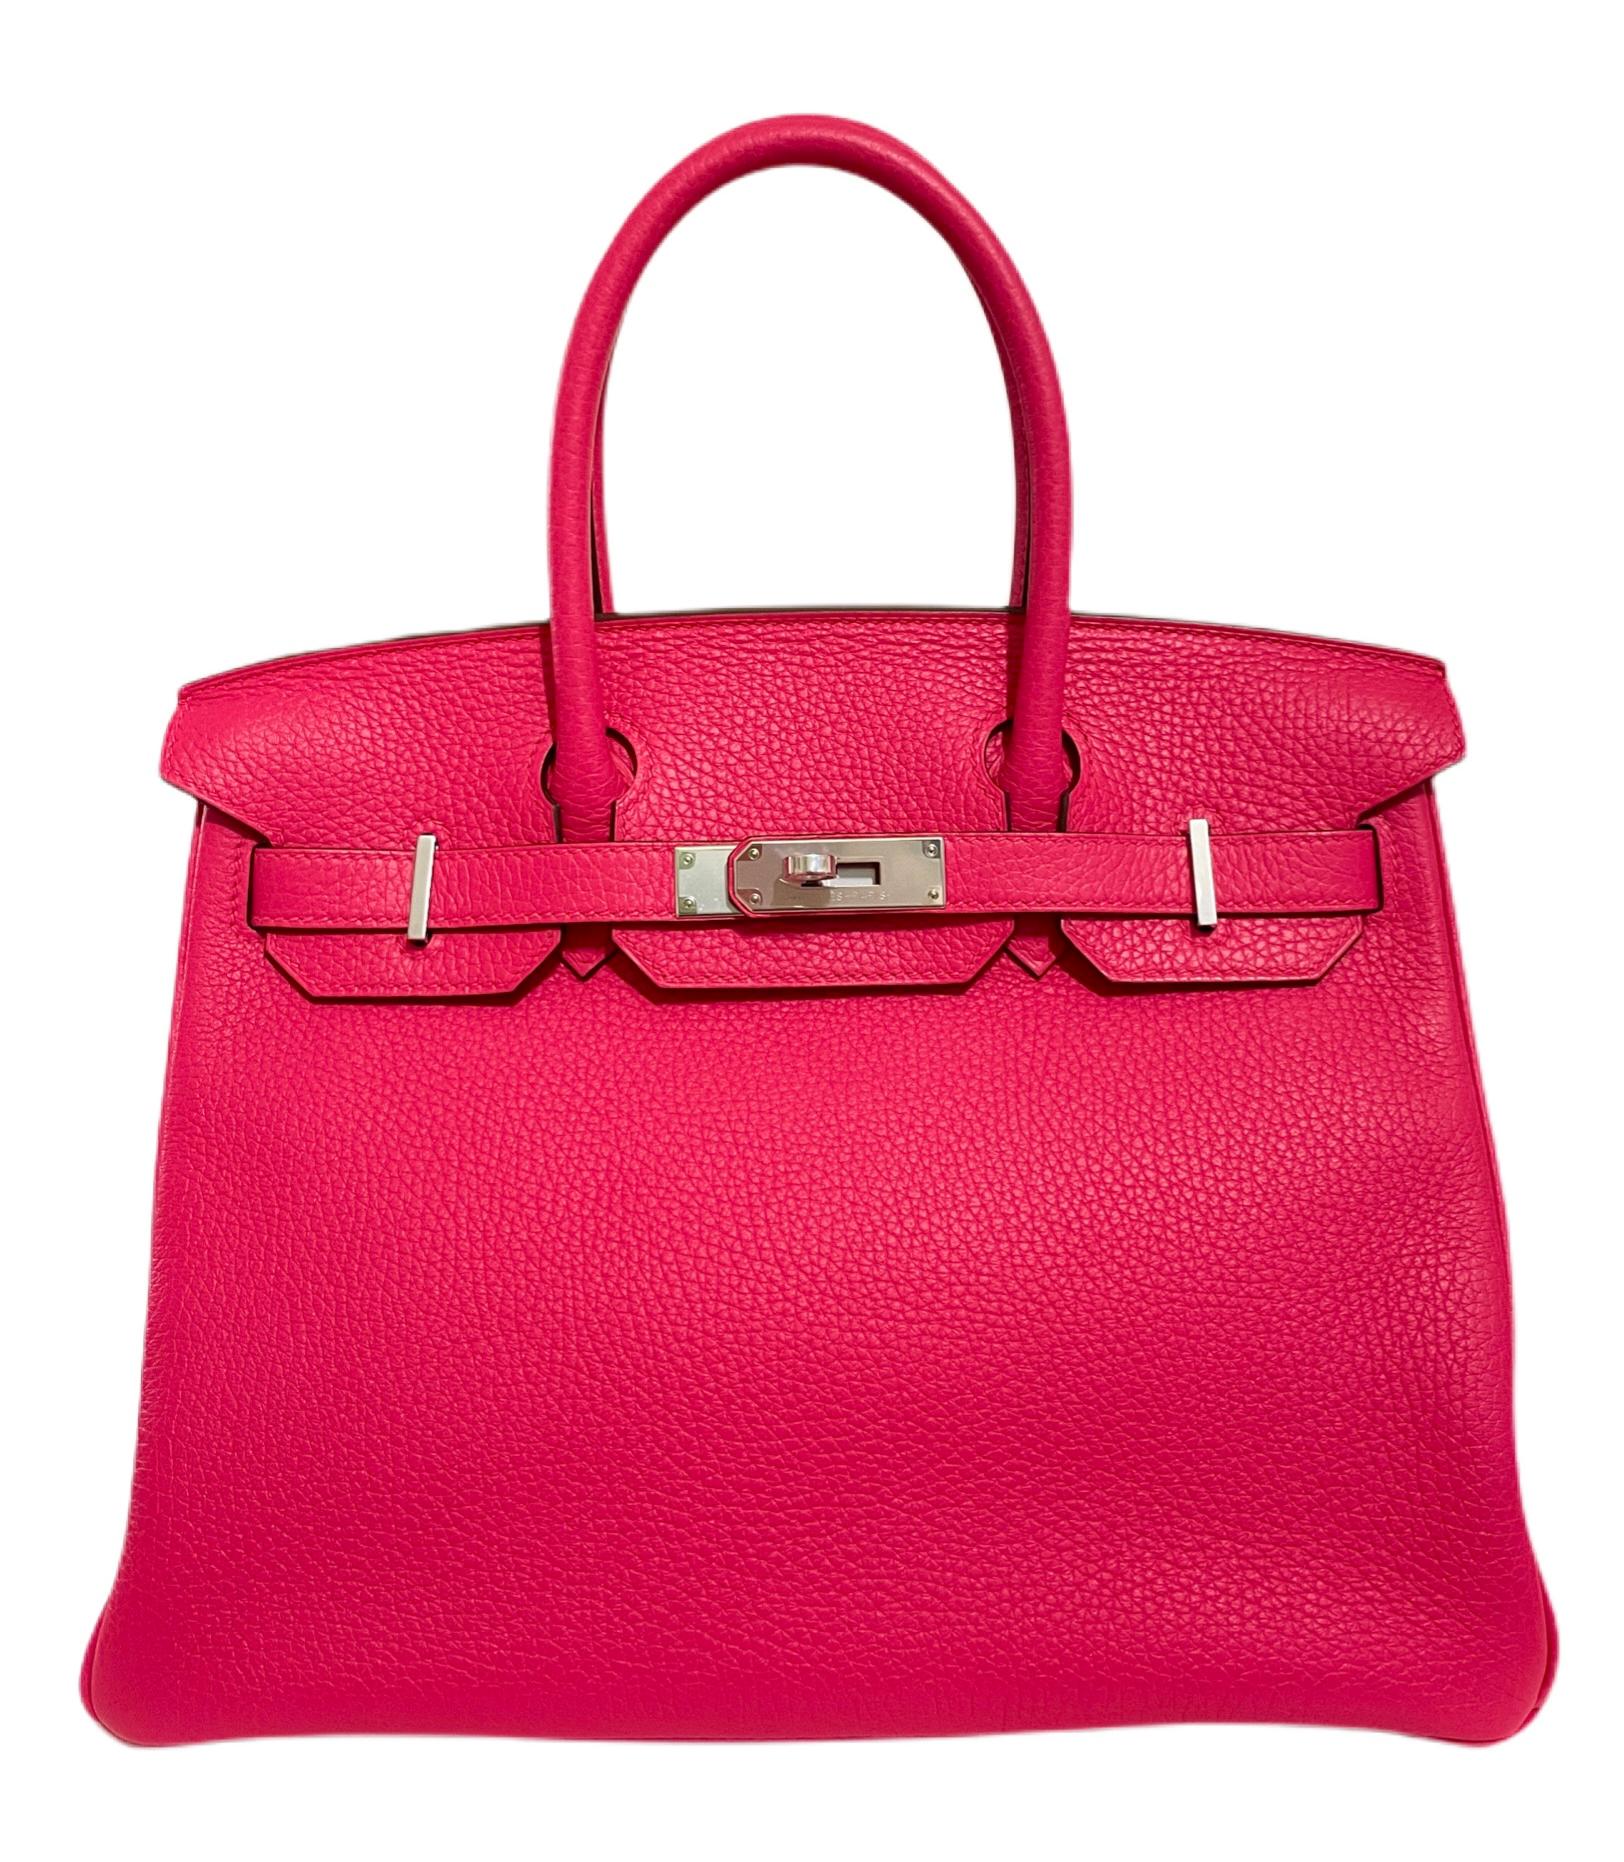 Absolutely Stunning New Hermes Birkin 30 Rose Extreme Pink Palladium Hardware. Y Stamp 2020.

Shop with confidence from Lux Addicts. Authenticity Guaranteed!